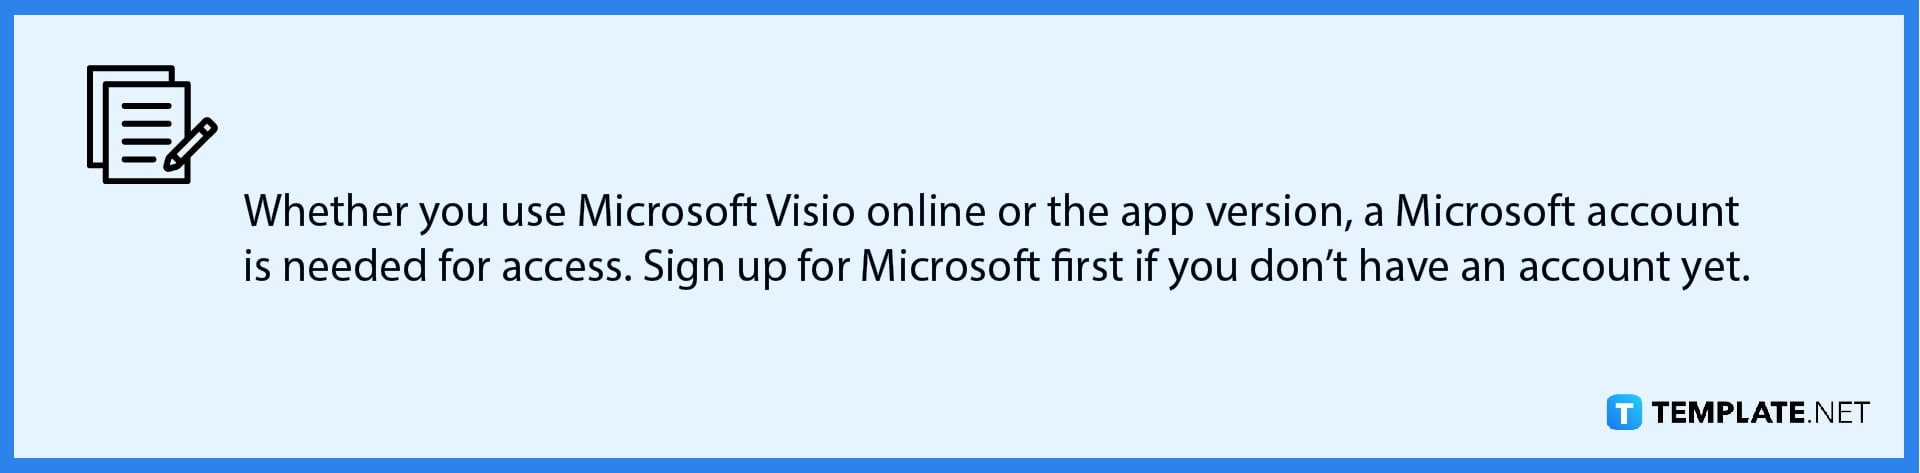 how-to-use-microsoft-visio-note-1